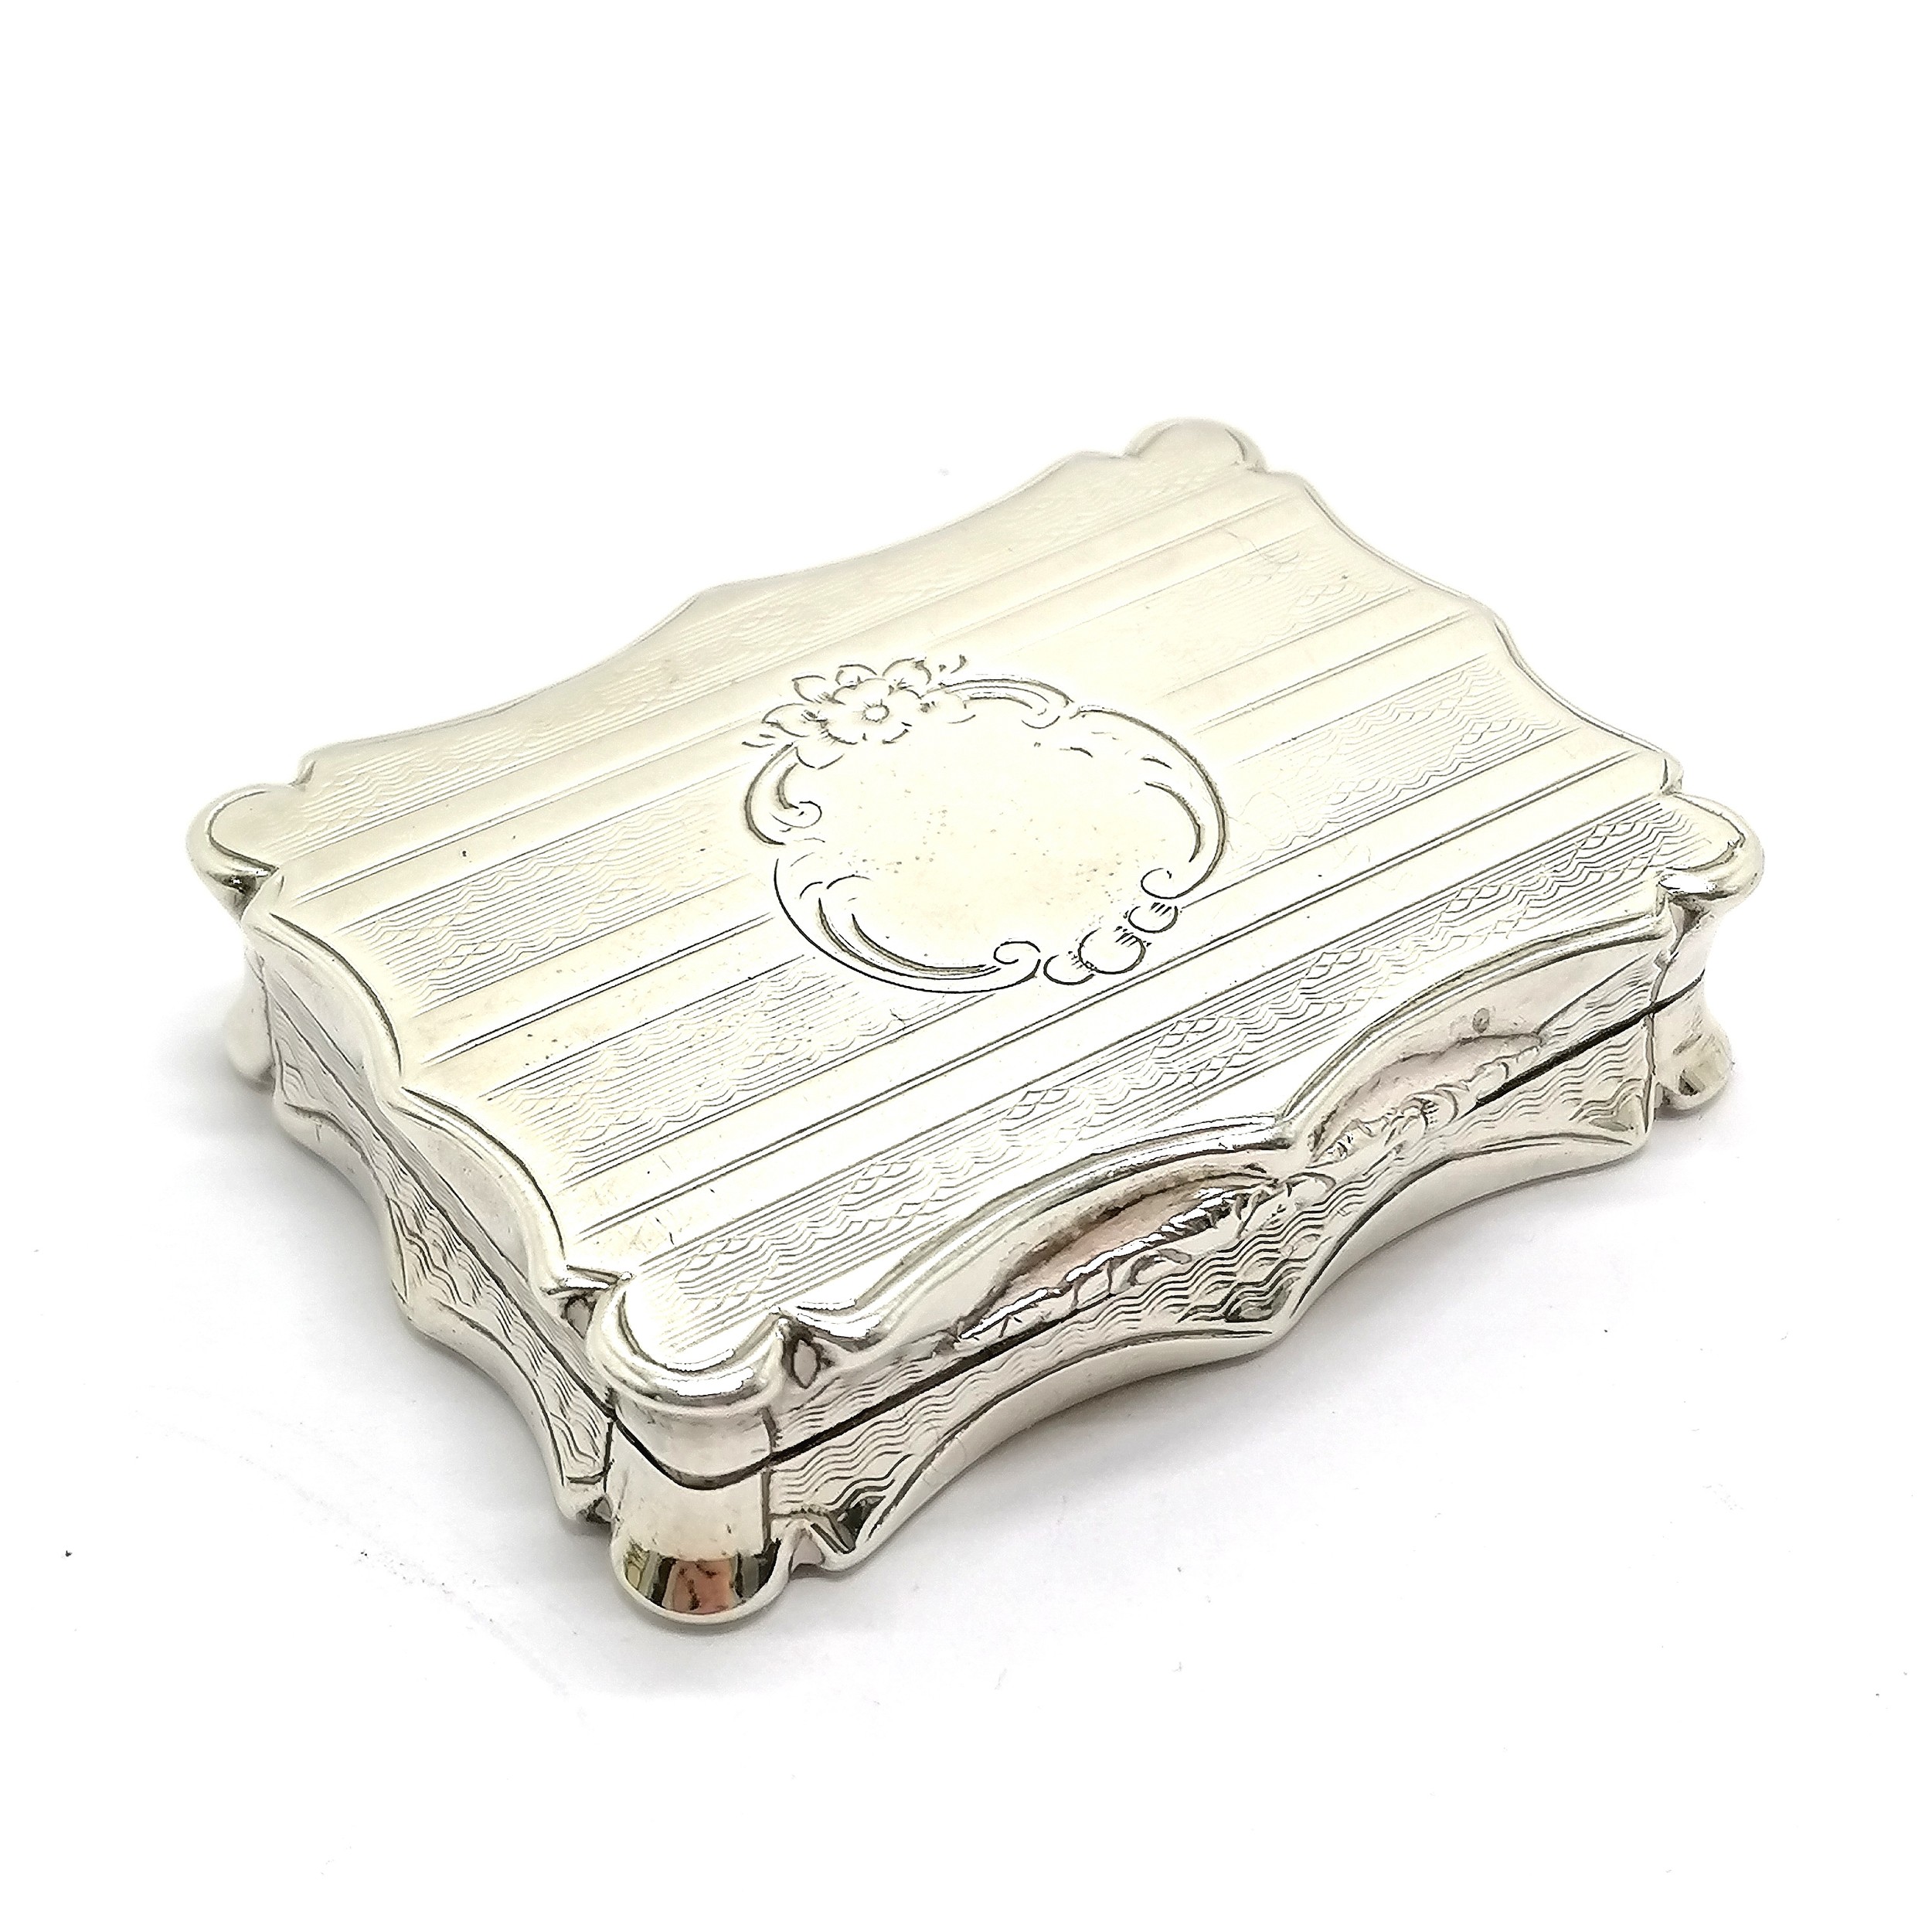 1850 Victorian silver snuff box with gilt interior by Nathaniel Mills - 4.2cm x 3.2cm & 24g total